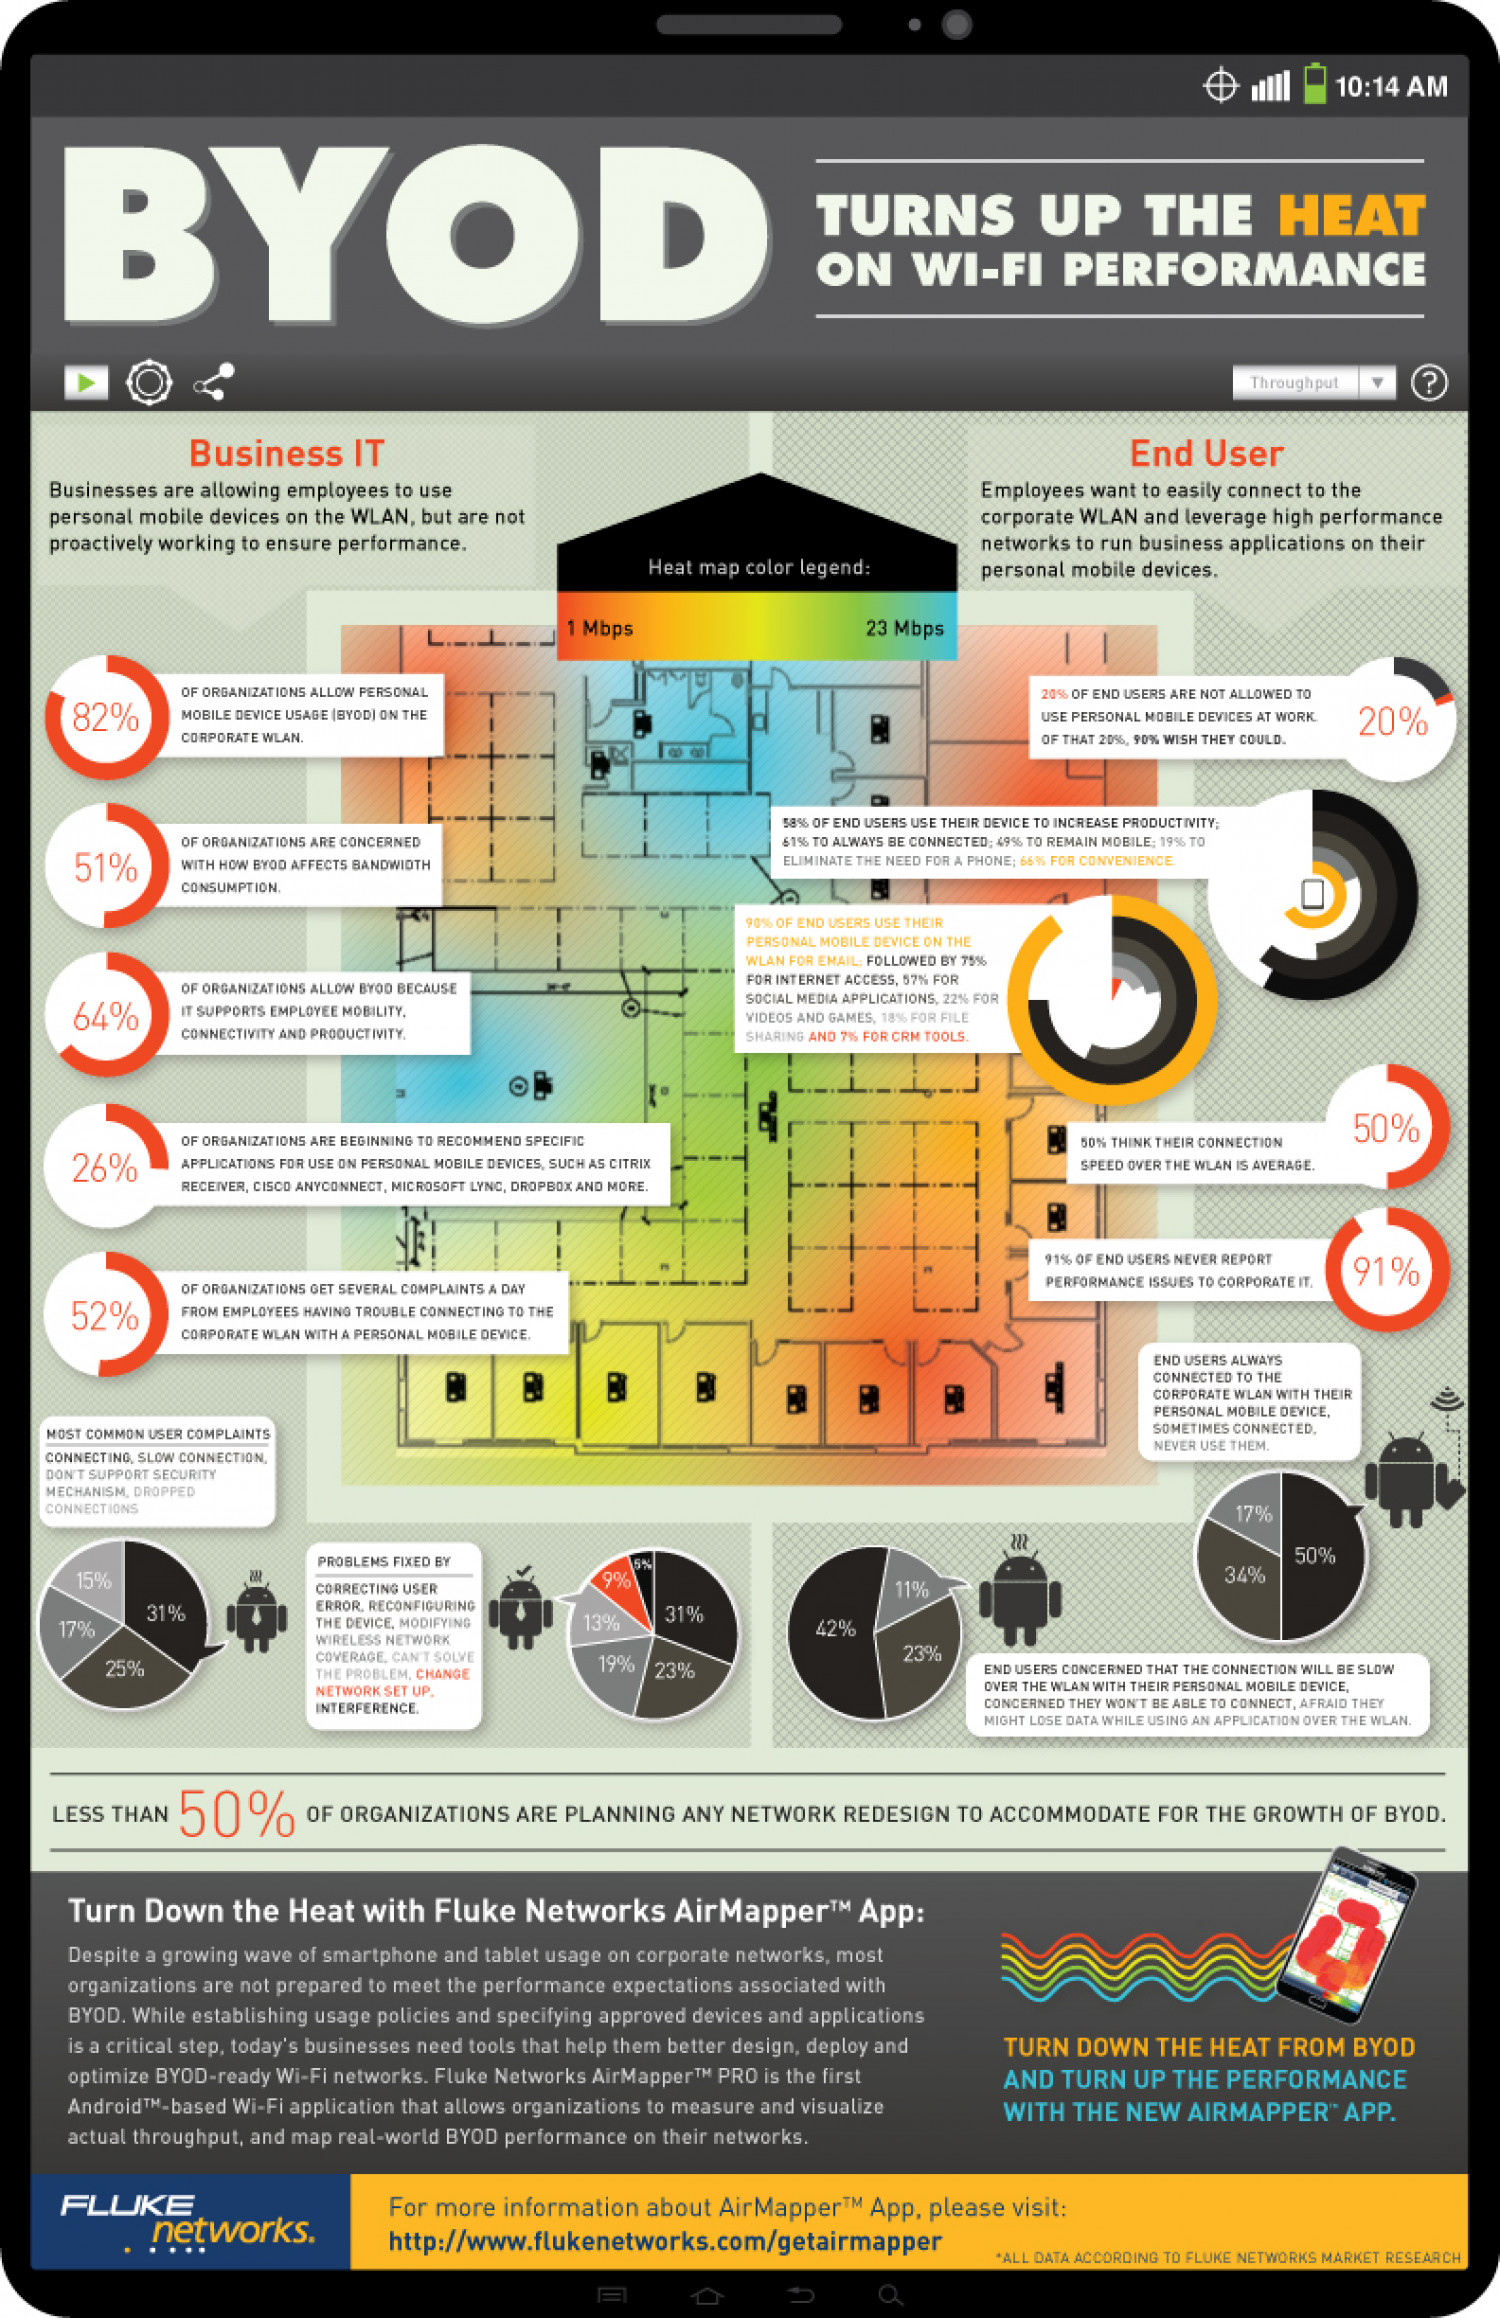 BYOD Turns Up the Heat on Wi-Fi Performance Infographic